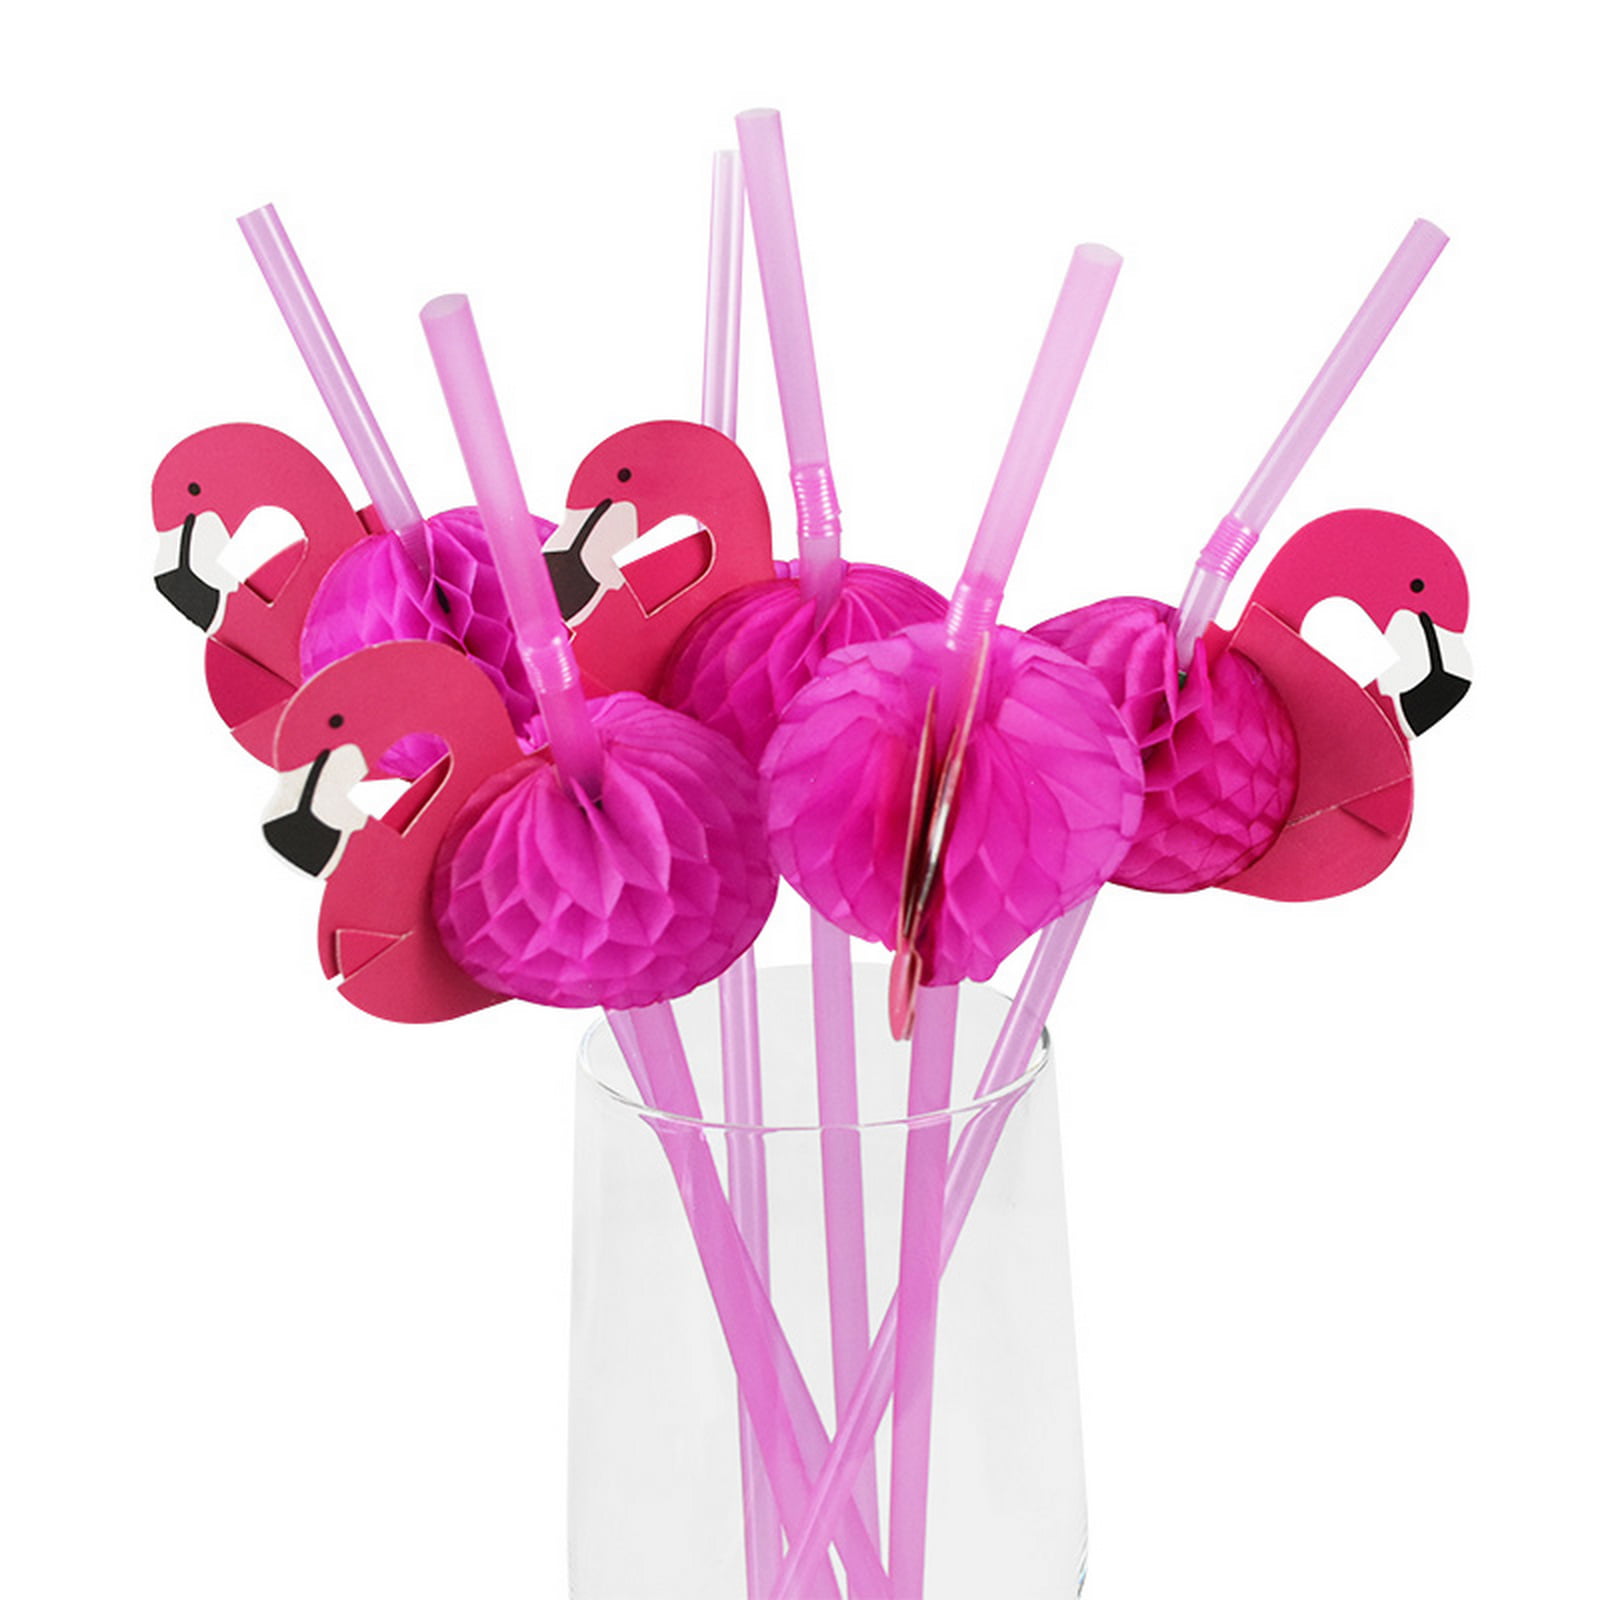 Nicetruc Flamingo Straws 12 PCS/Pack 3D Honeycomb Paper Straws for Hawaiian Luau Birthday Weddings Pool Cocktail Party Supplies Tropical Drinks Decorations 